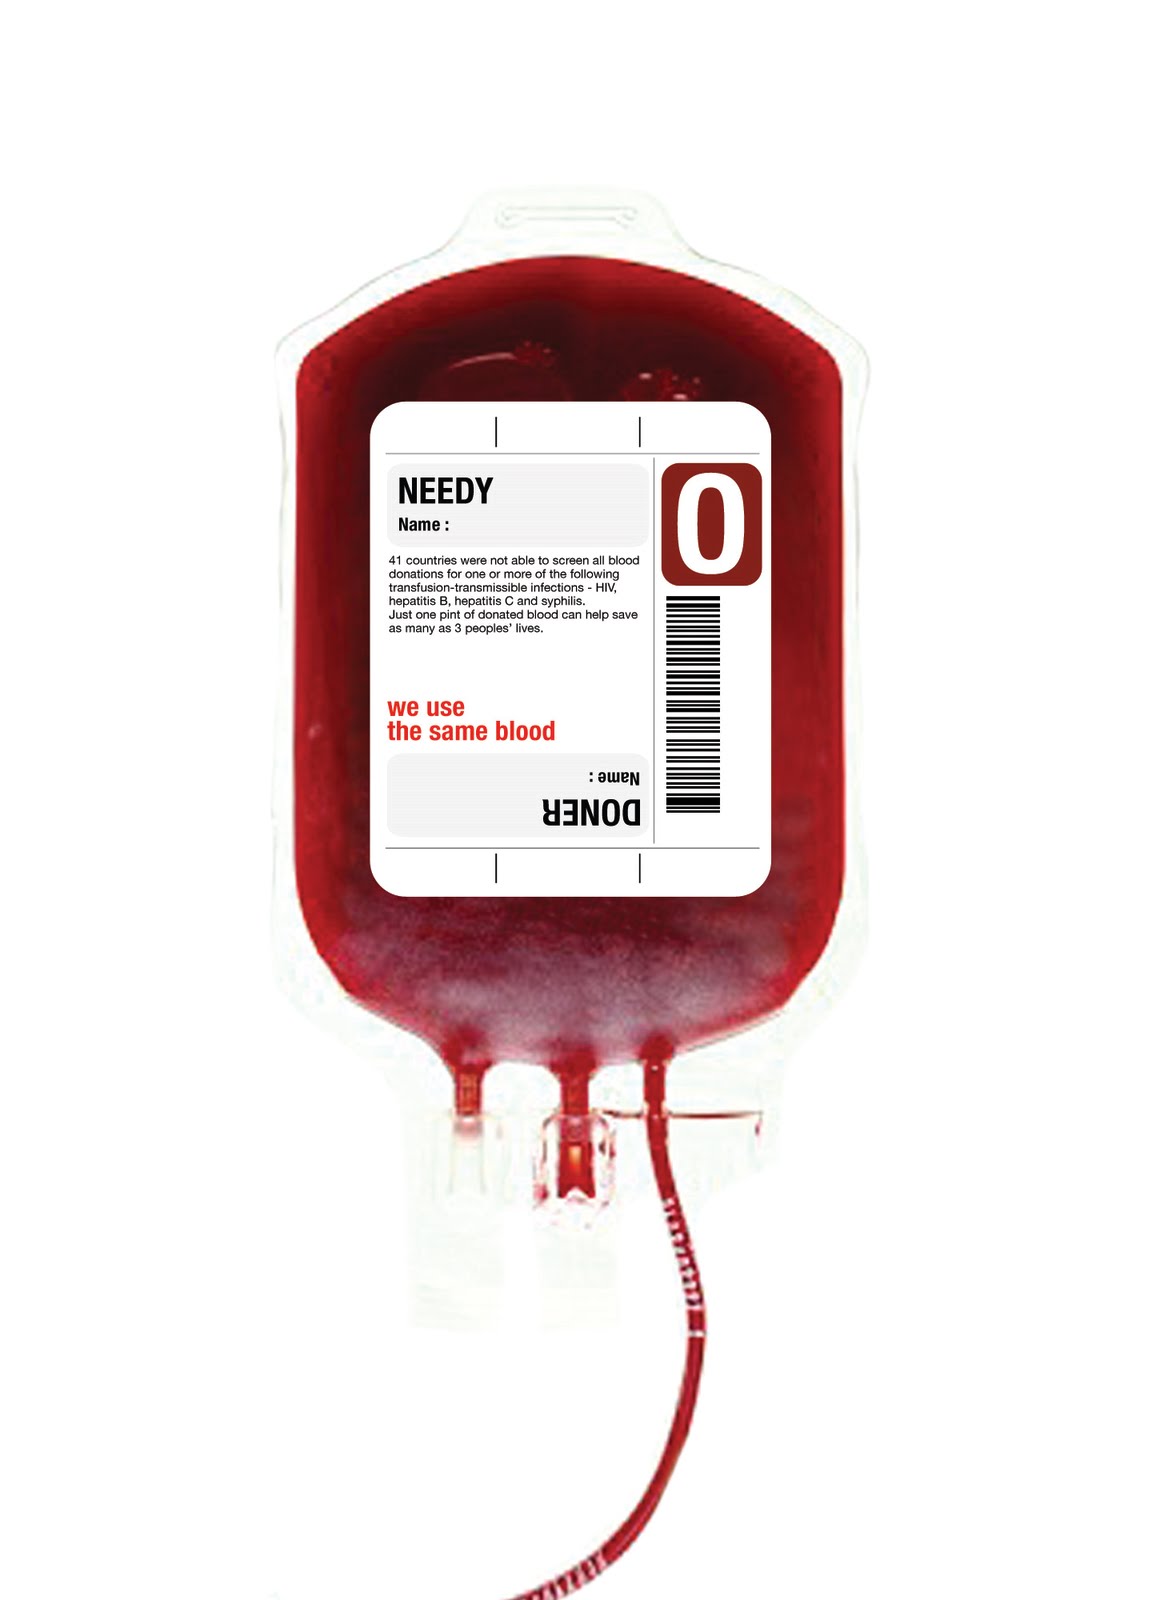 blood bank clipart - photo #1